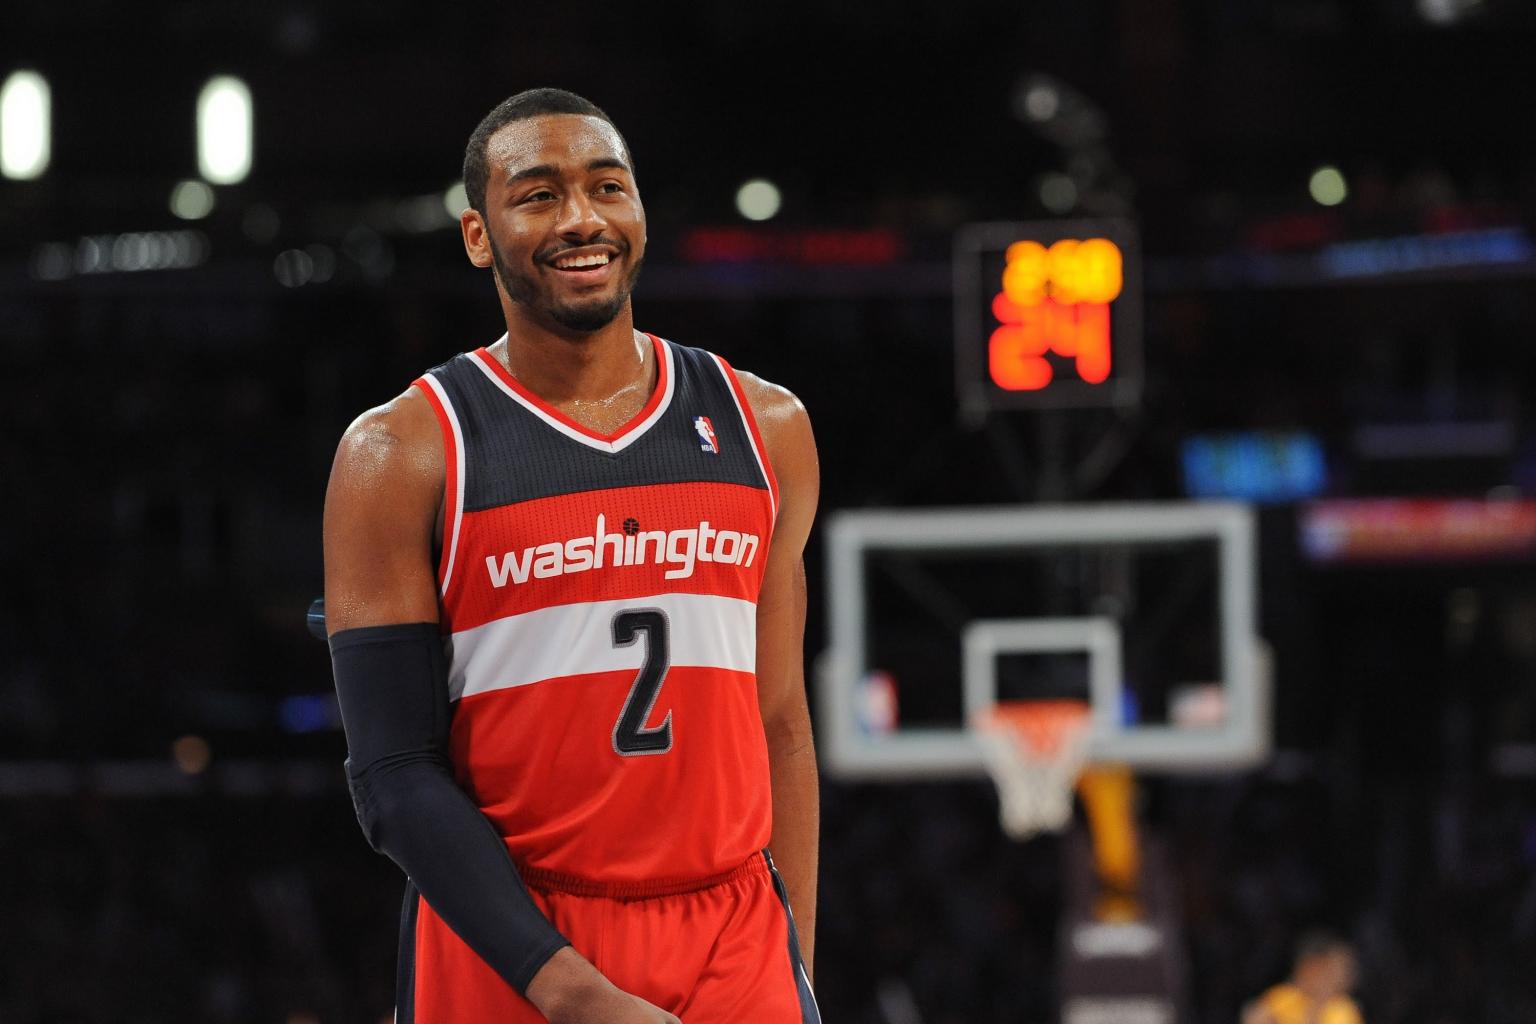 John Wall's Top 10 Plays Of 2012-2013 - YouTube